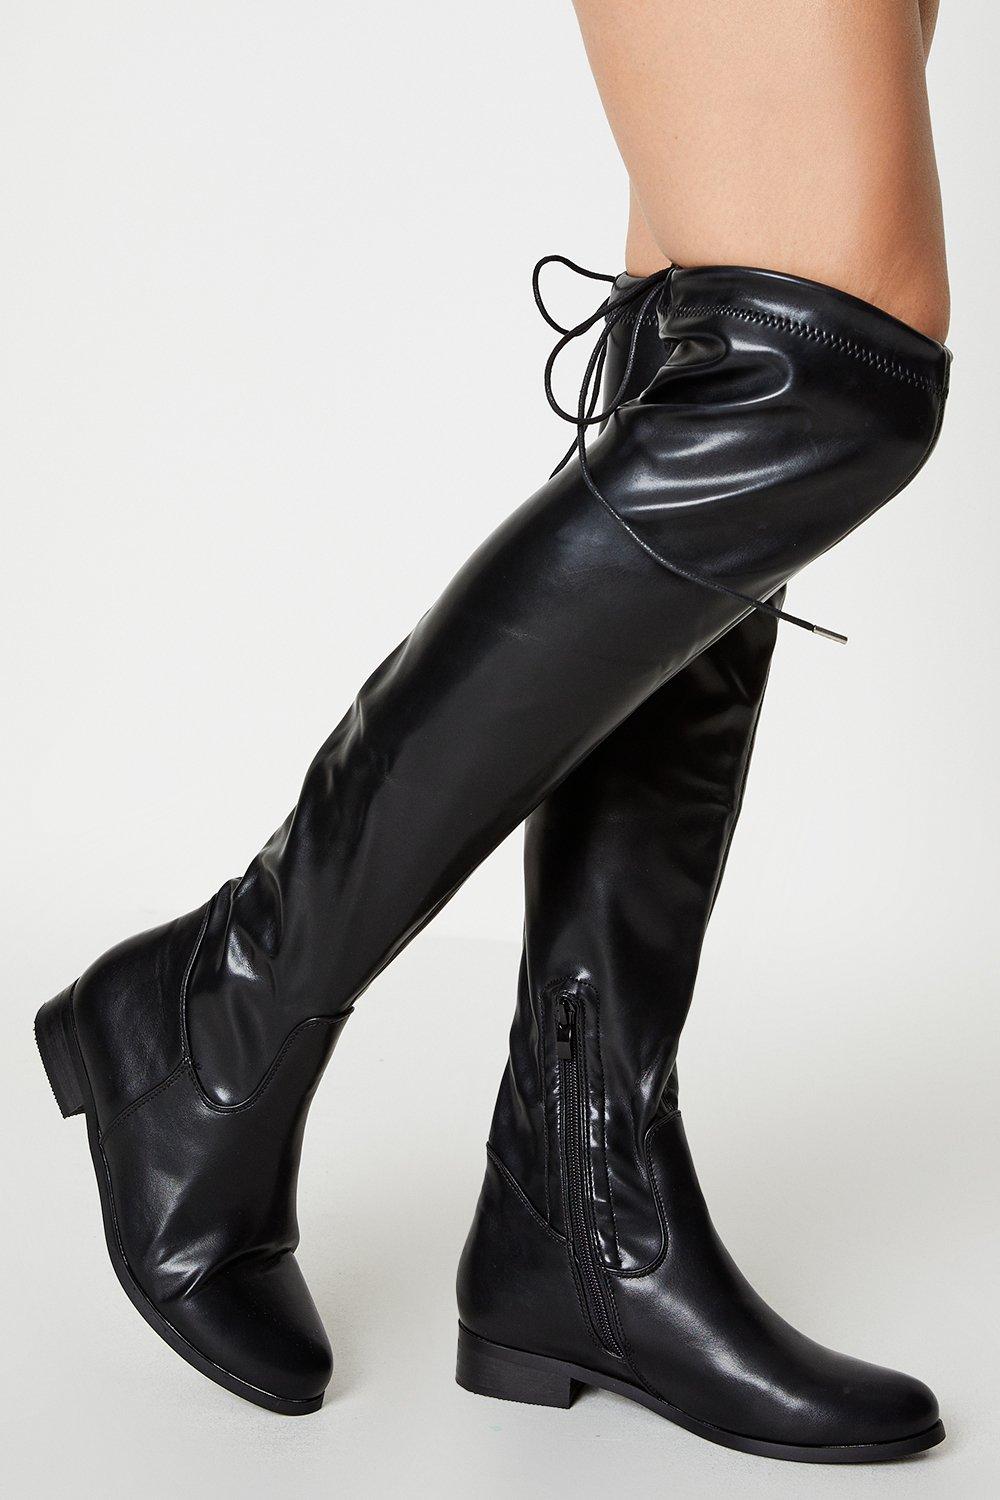 Women's Kelly Flat Over The Knee Boots - black - 6